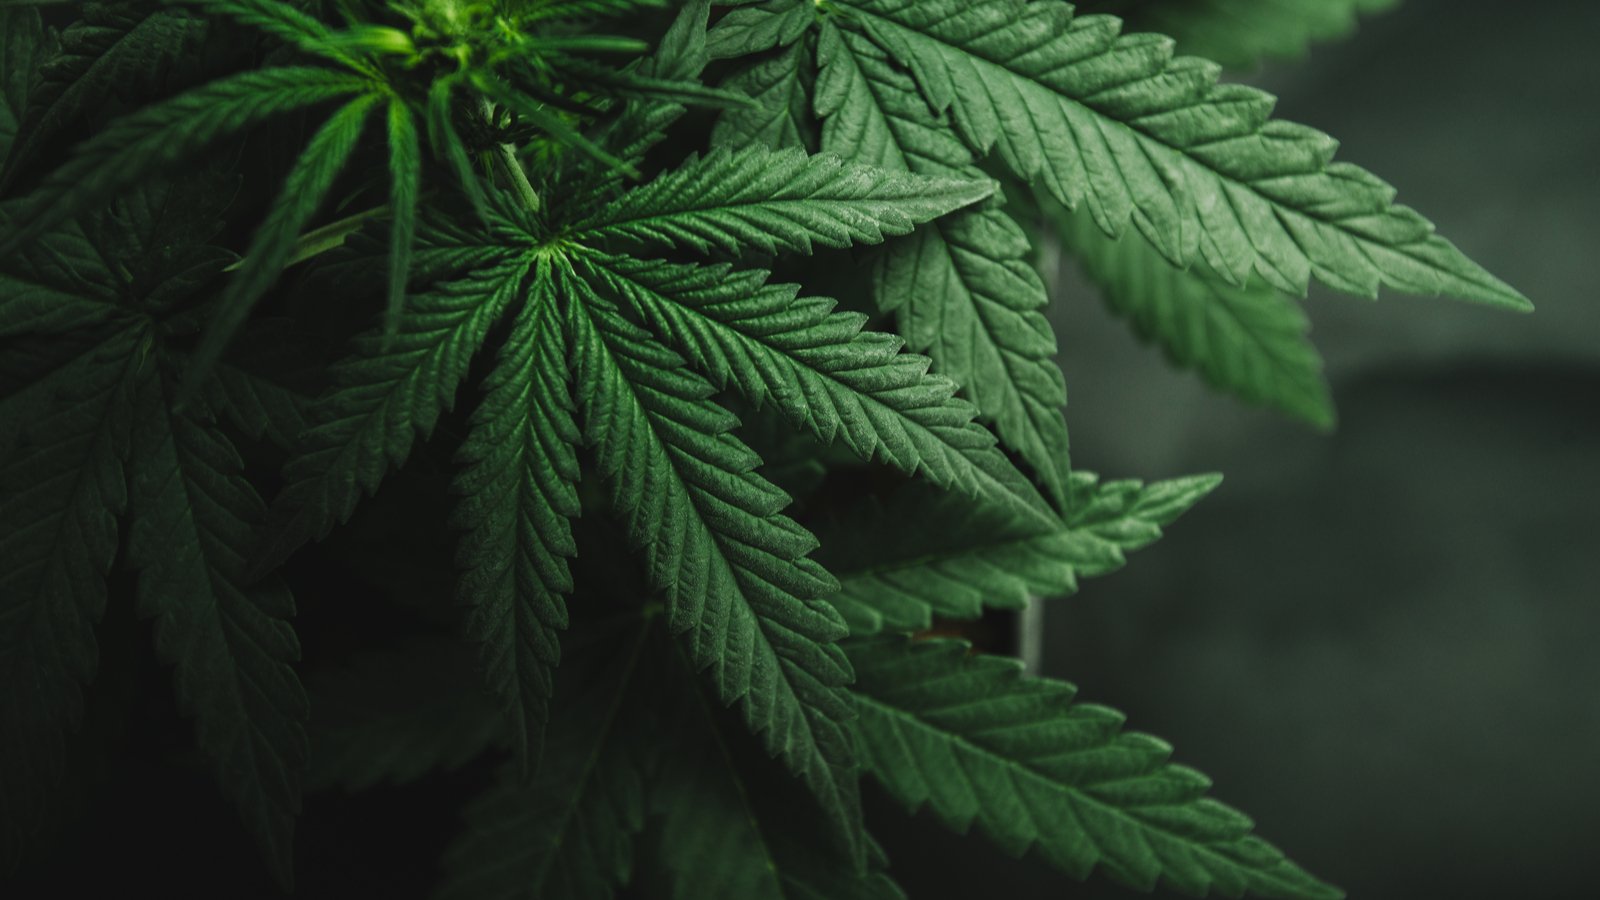 Image of marijuana leaves growing on a plant representing HPCO stock.